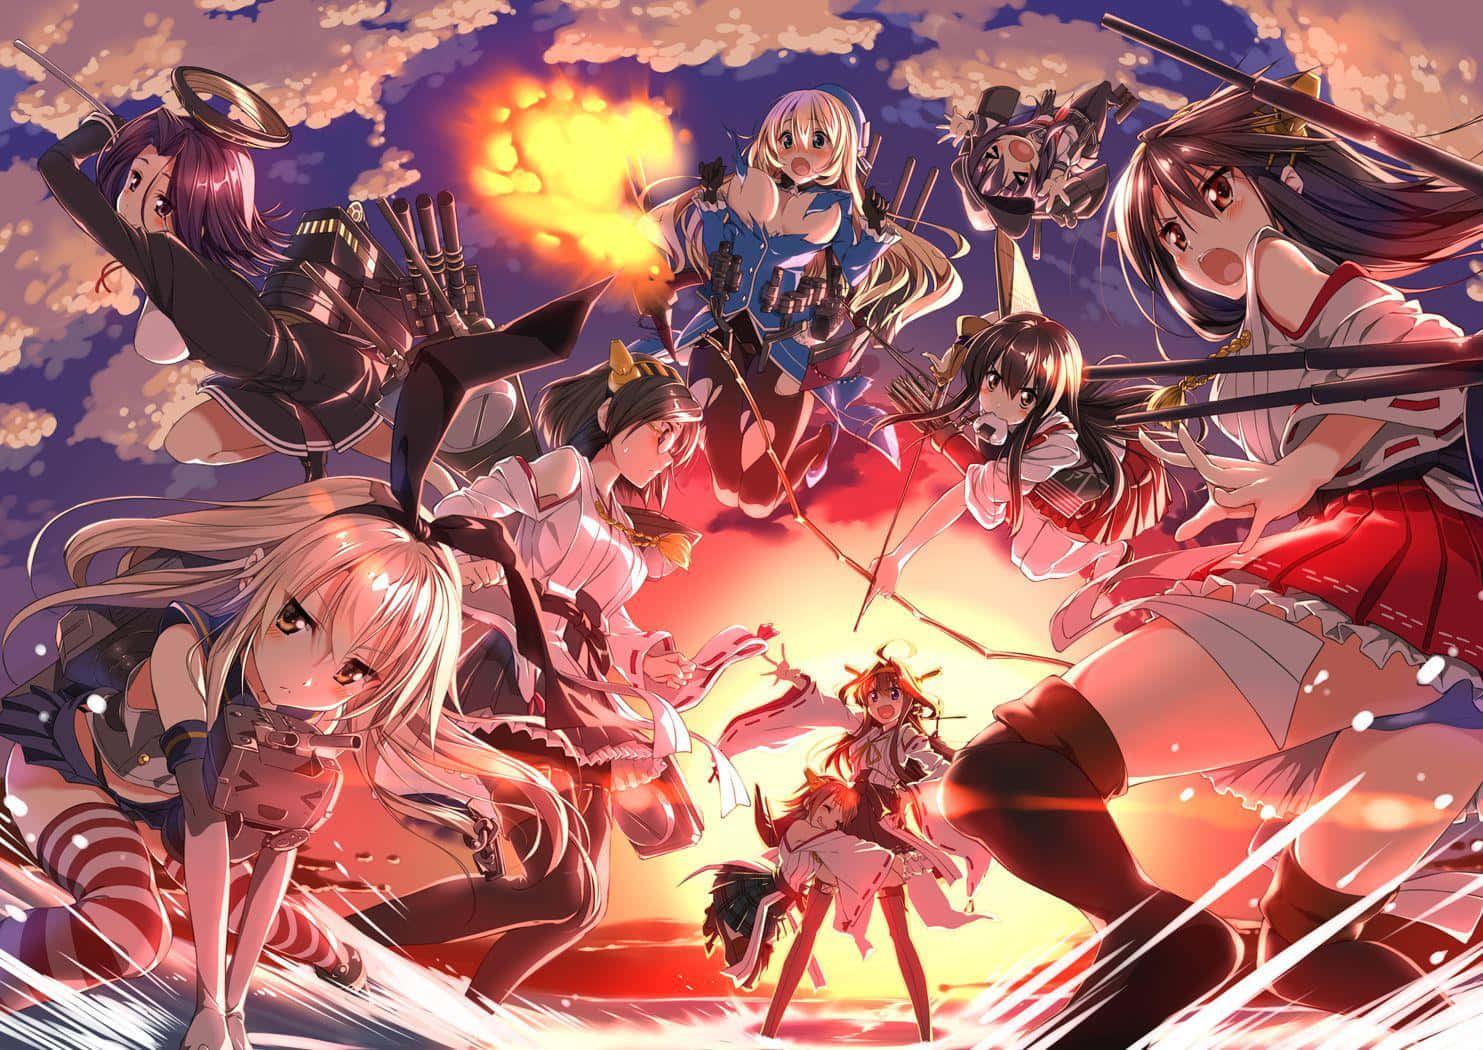 Navigate The Seas With The Kancolle Fleet Wallpaper